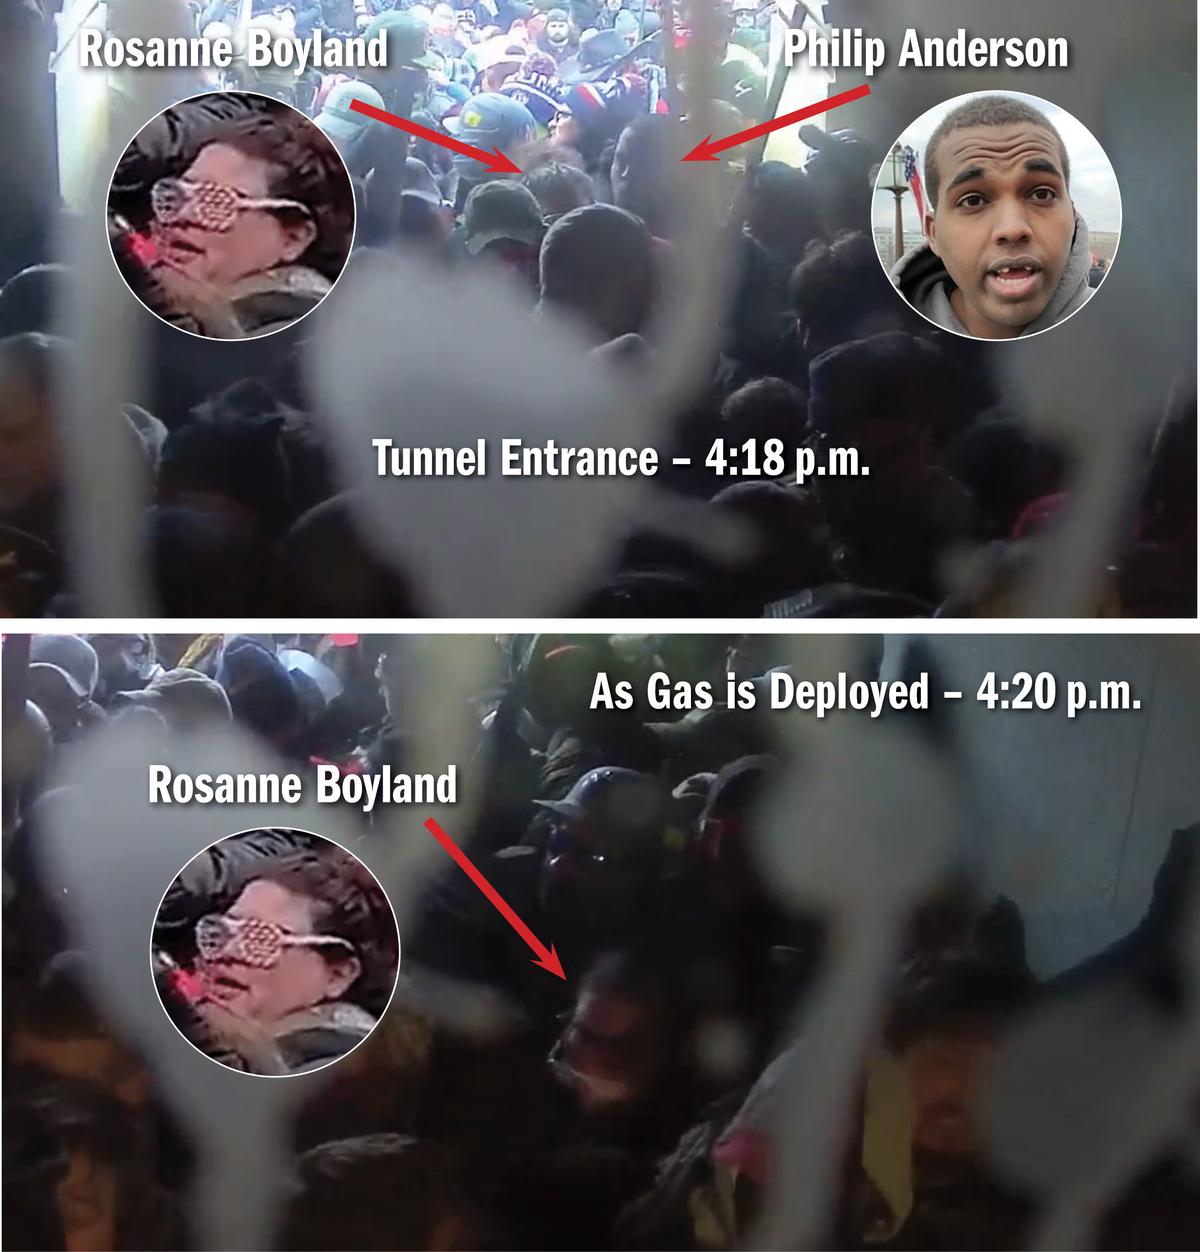 Rosanne Boyland and Philip Anderson entered the West Terrace tunnel of the U.S. Capitol at 4:18 p.m. on Jan. 6, 2021. A stampede started at 4:20 when police deployed gas against the protesters. (Video Stills/Epoch Times Photo Illustration)